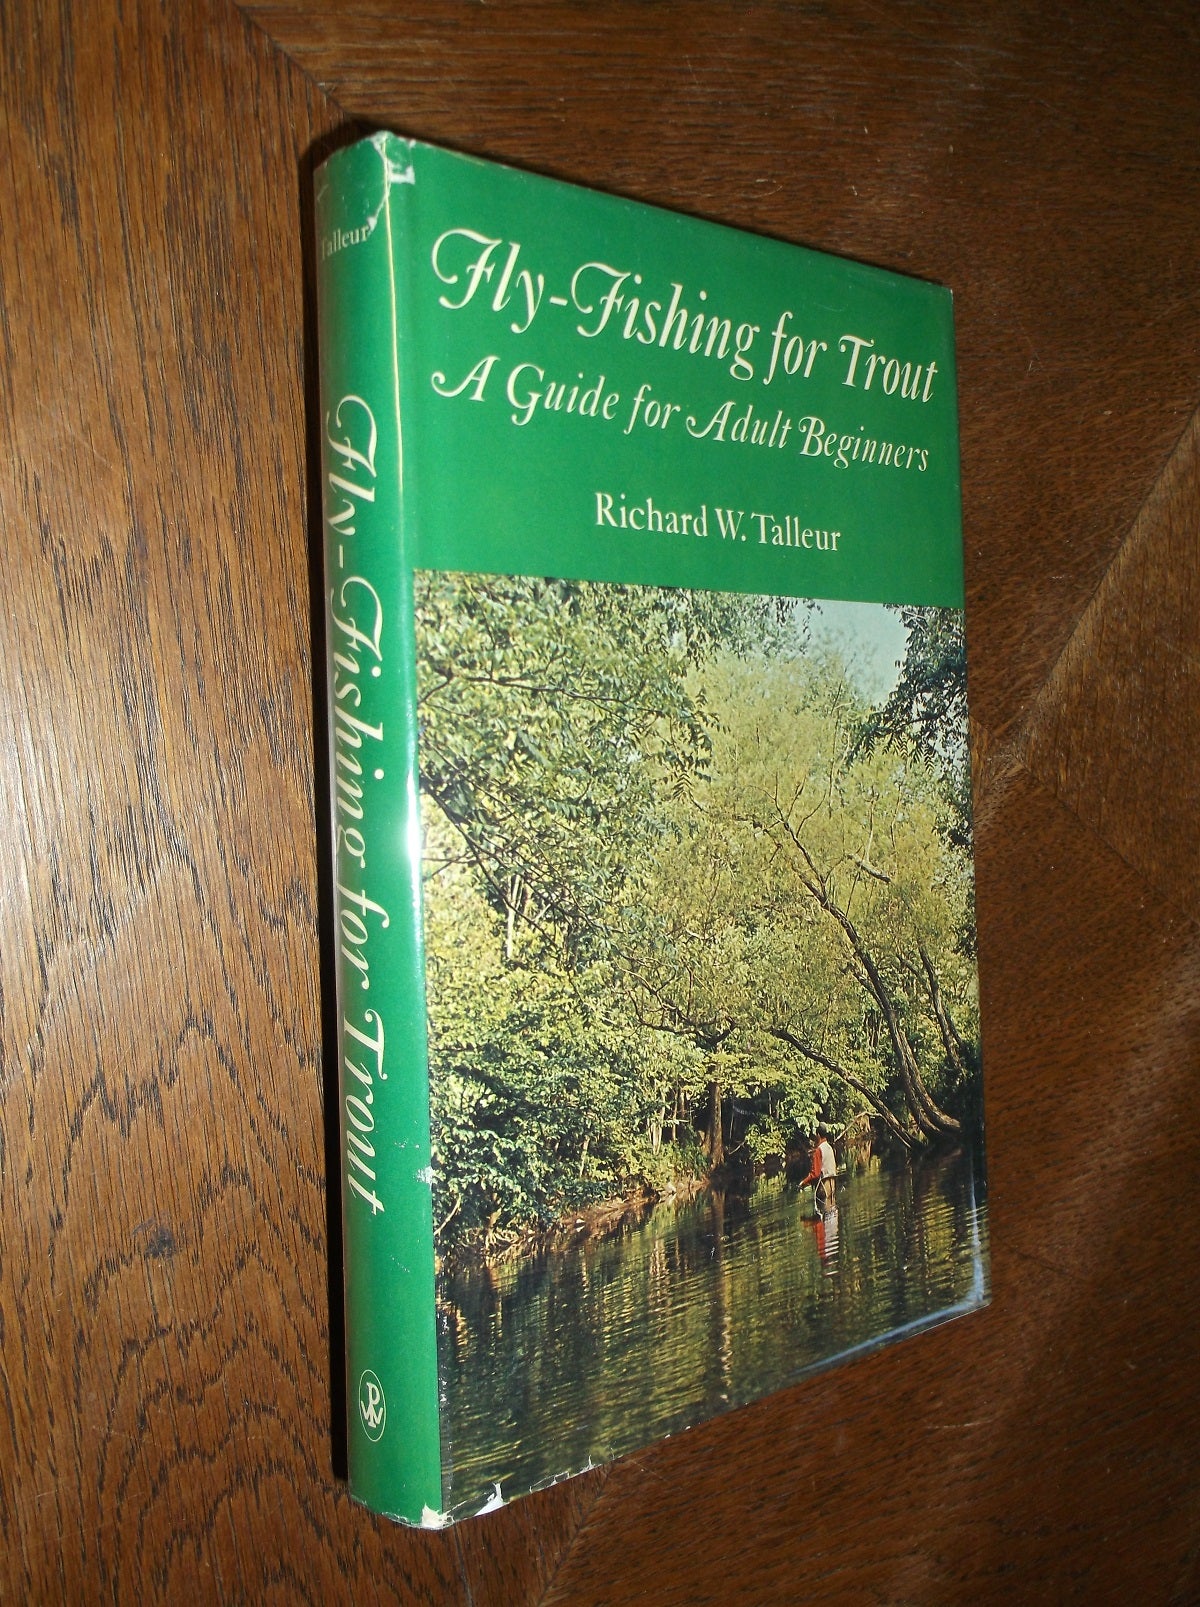 Fly-fishing for Trout: A Guide for Adult Beginners [Book]